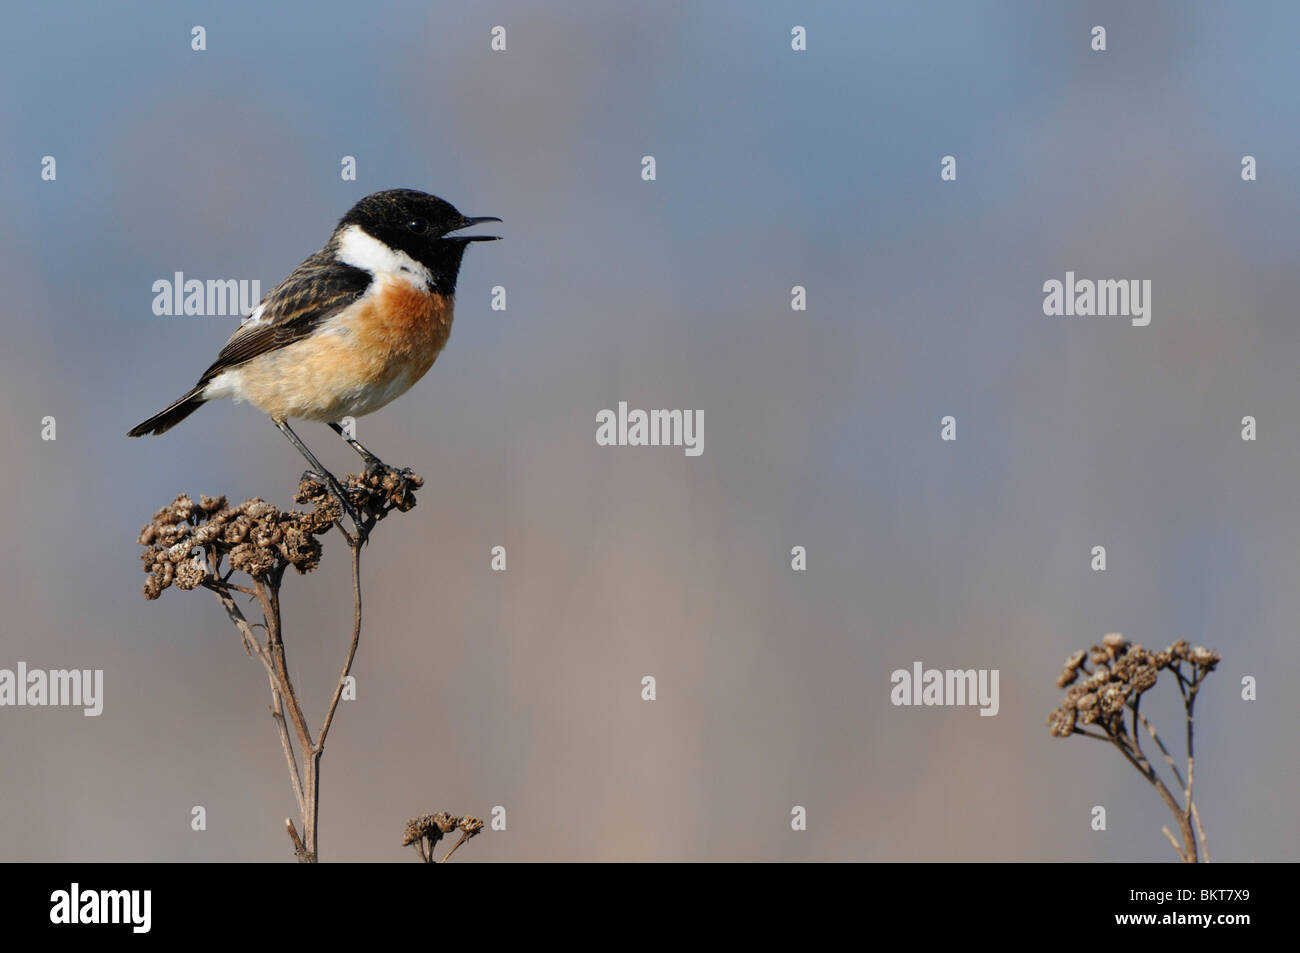 Man Roodborsttapuit zingend op dode vegetatie; Male Stonechat singing perched on dried plant Stock Photo